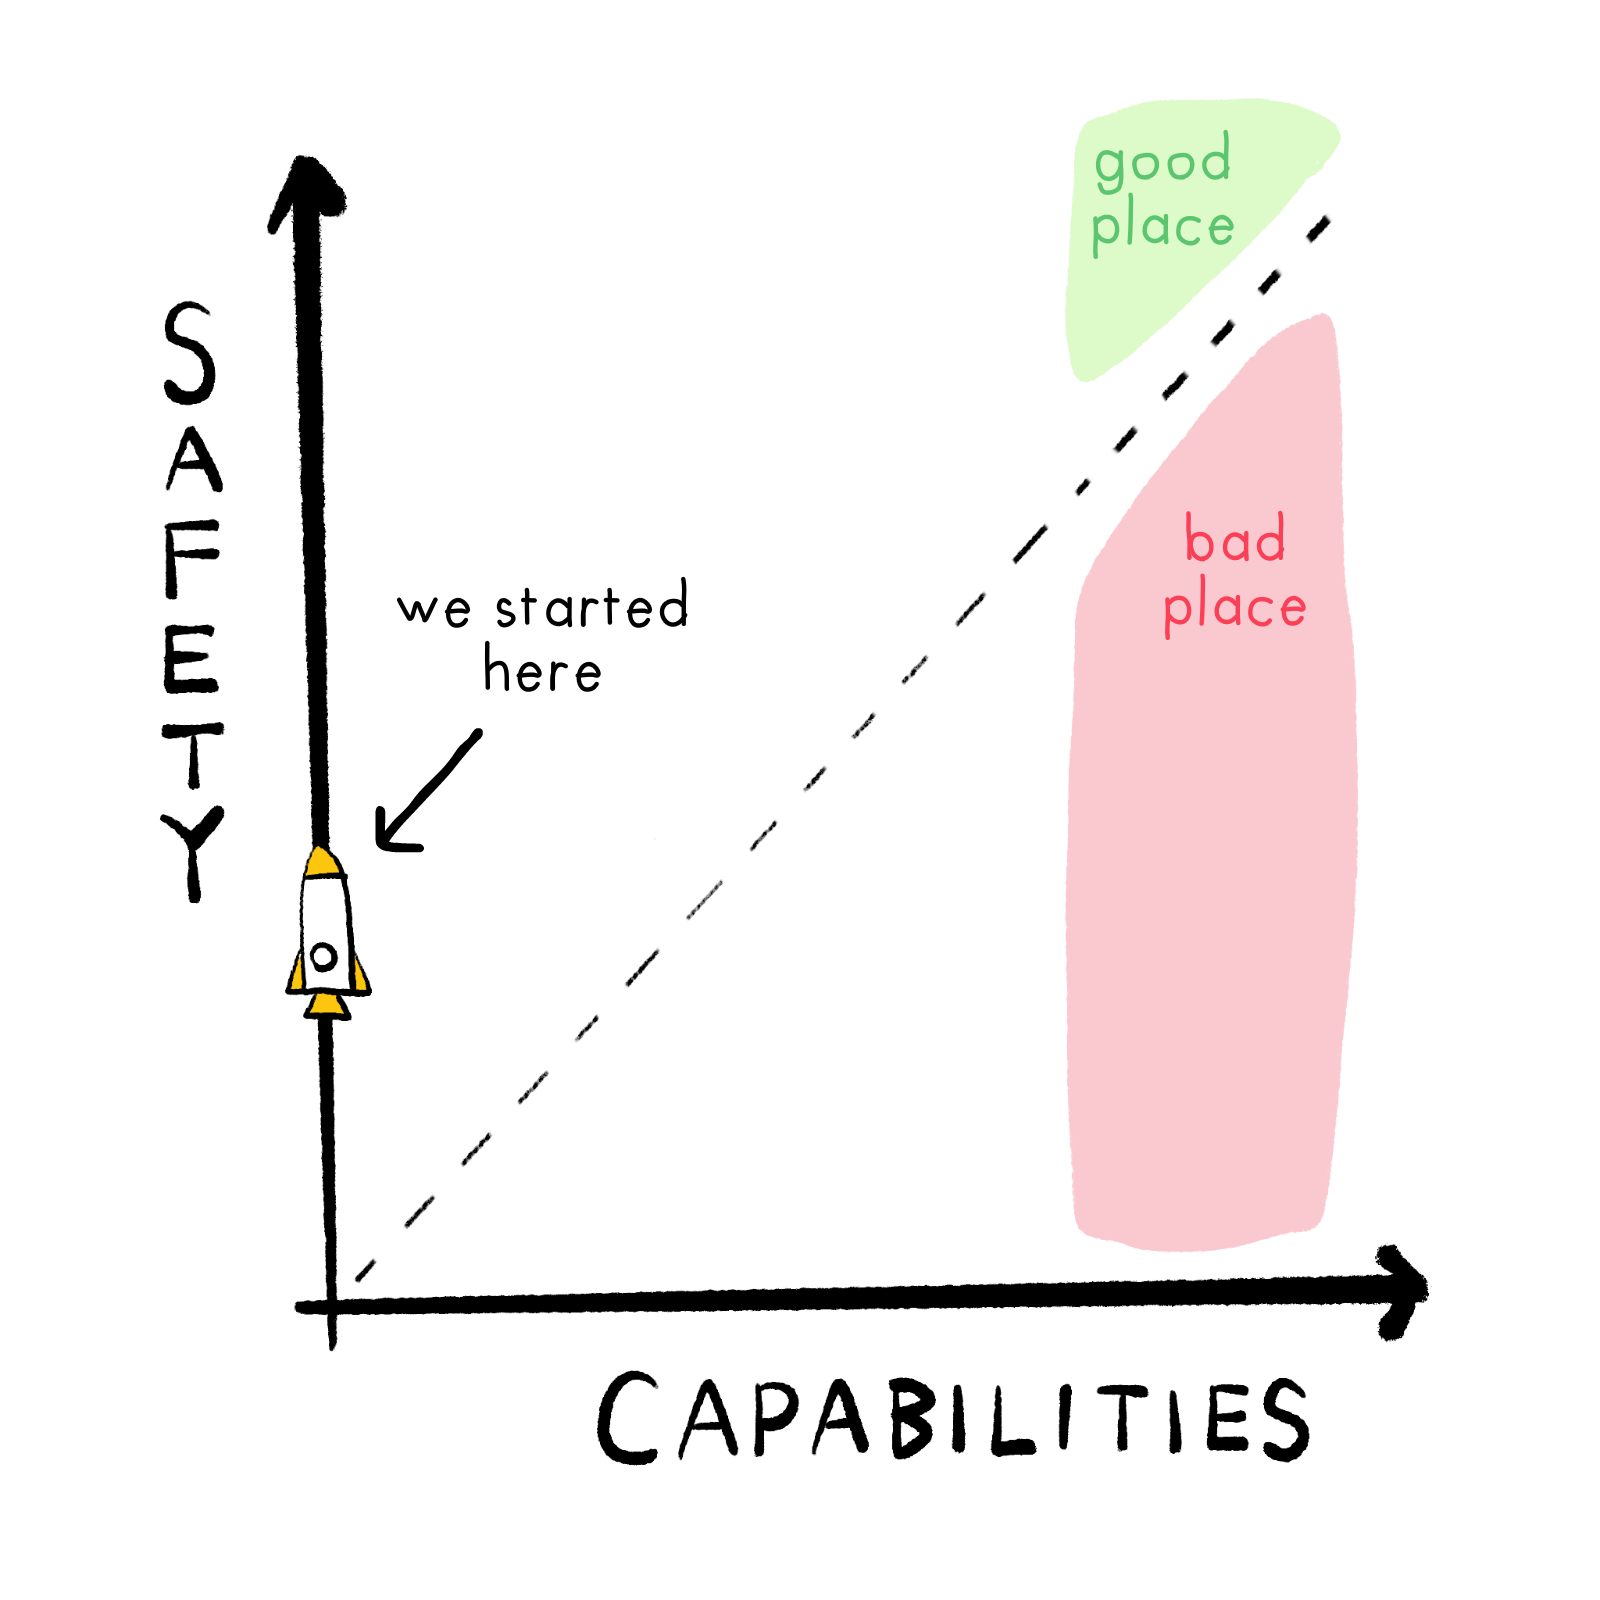 Same graph, with icon of rocket placed at 0 Capabilities, Some Safety.